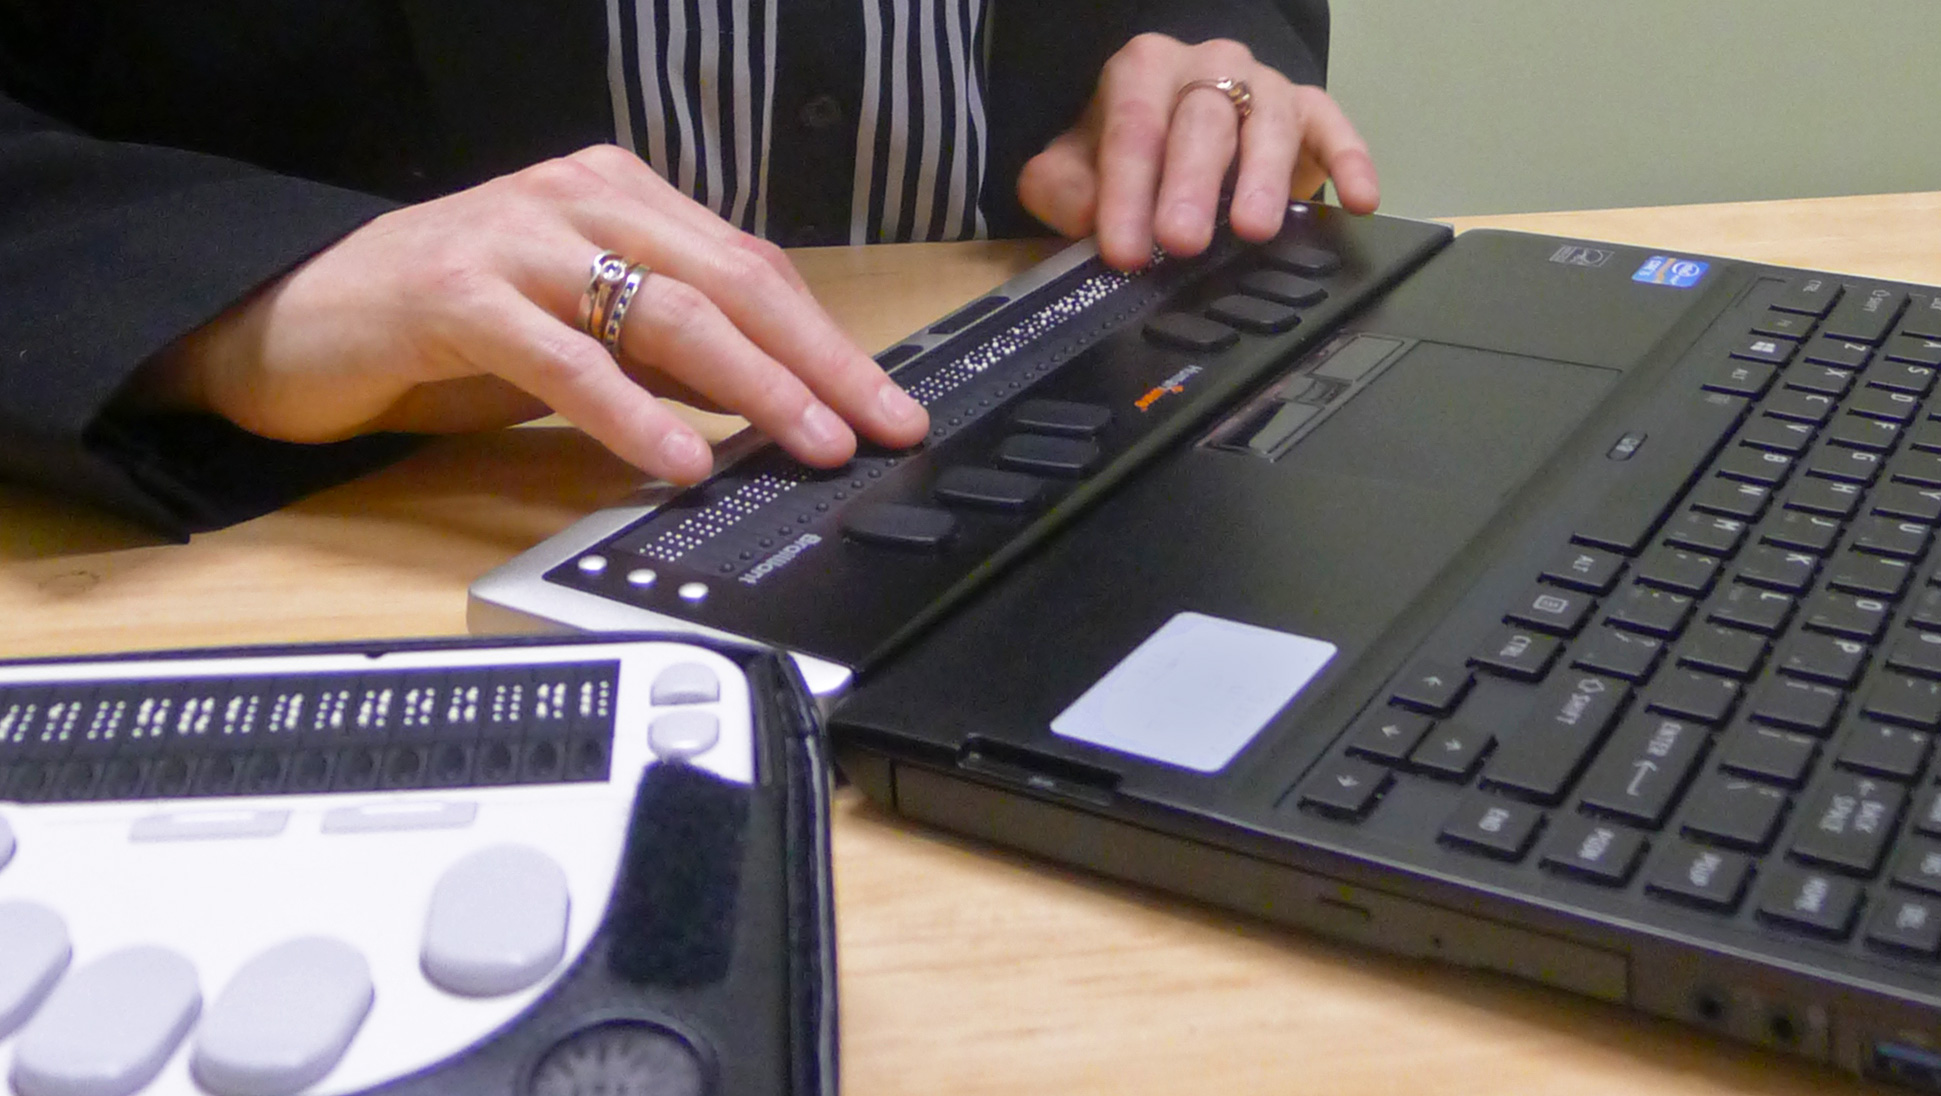 A person's hands reading a refreshable braille display, and a braille note taker device is also in scene.